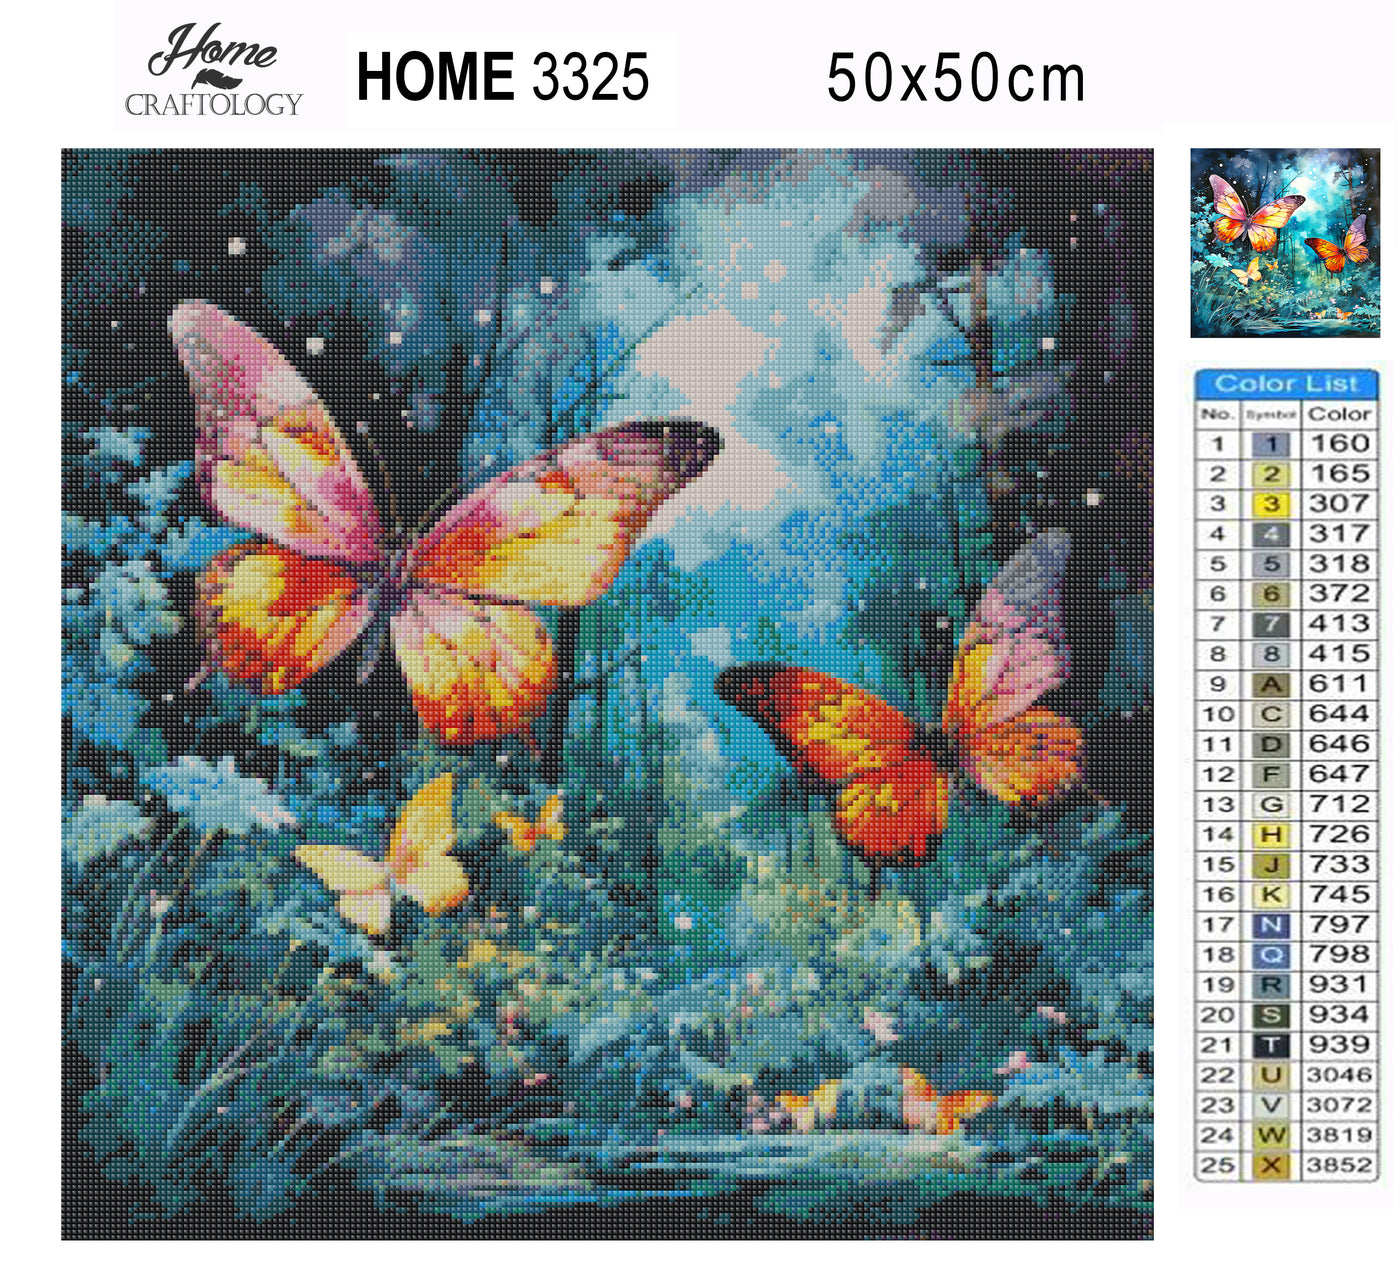 Butterflies in the Forest - Premium Diamond Painting Kit